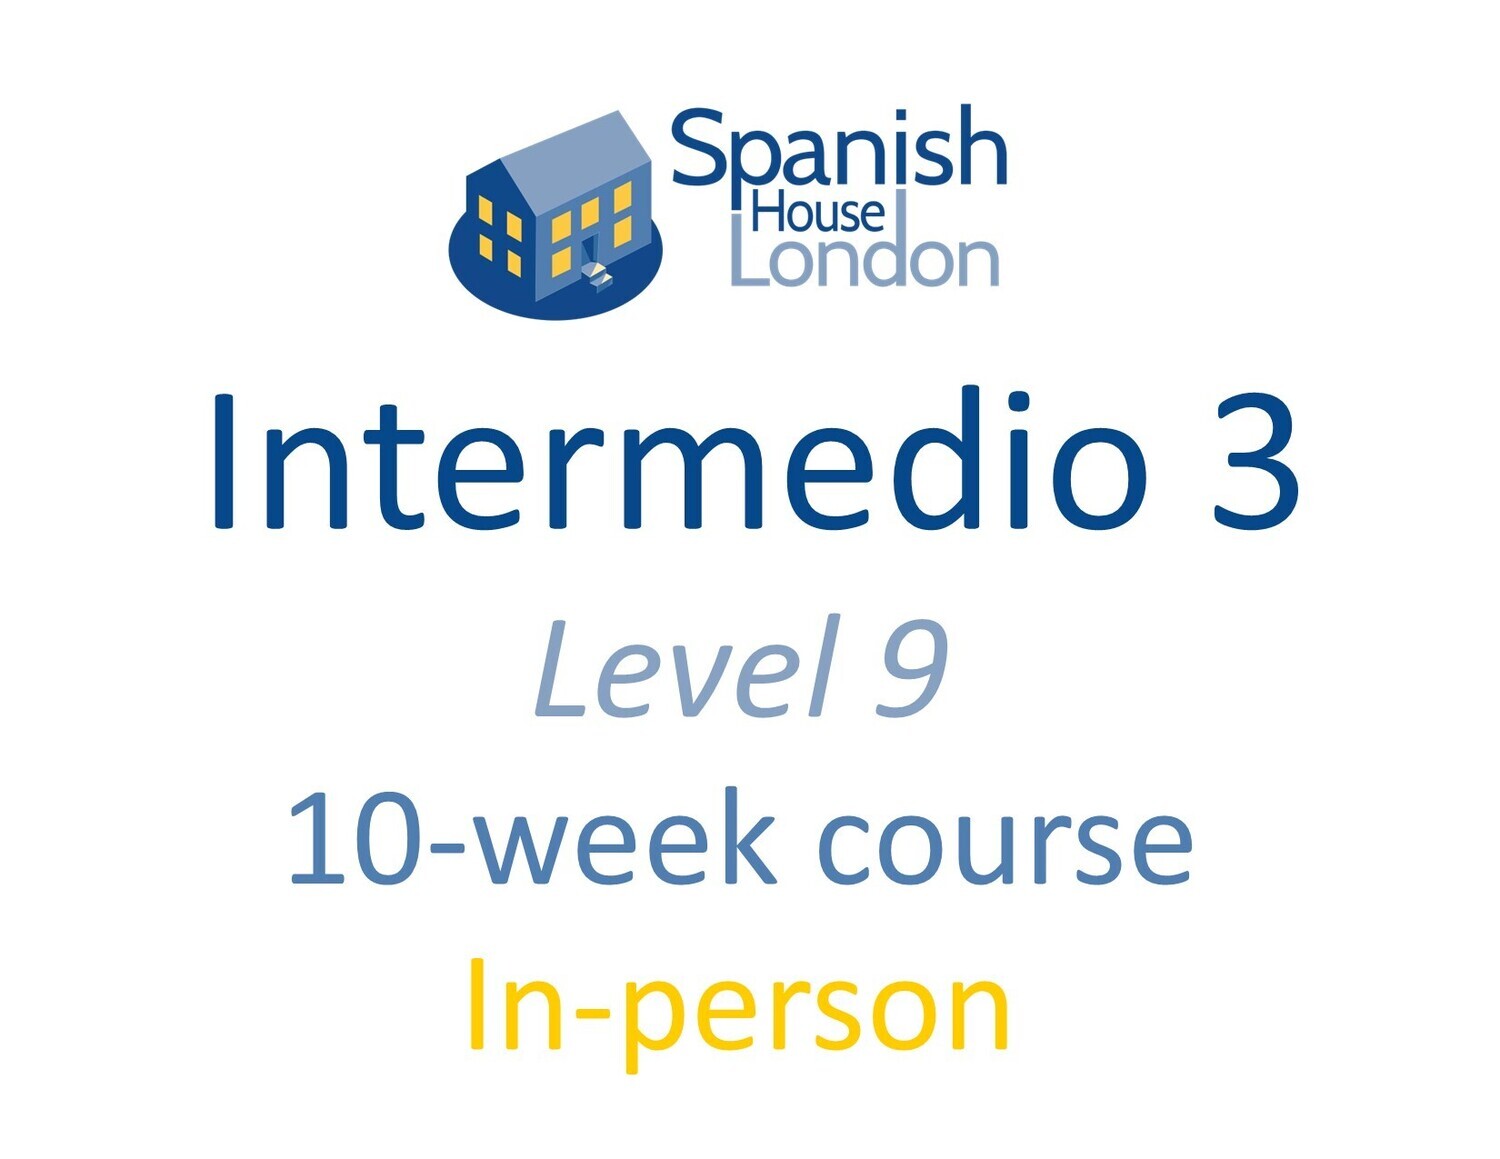 Intermedio 3 Course starting on 25th July at 6pm in Euston / King's Cross